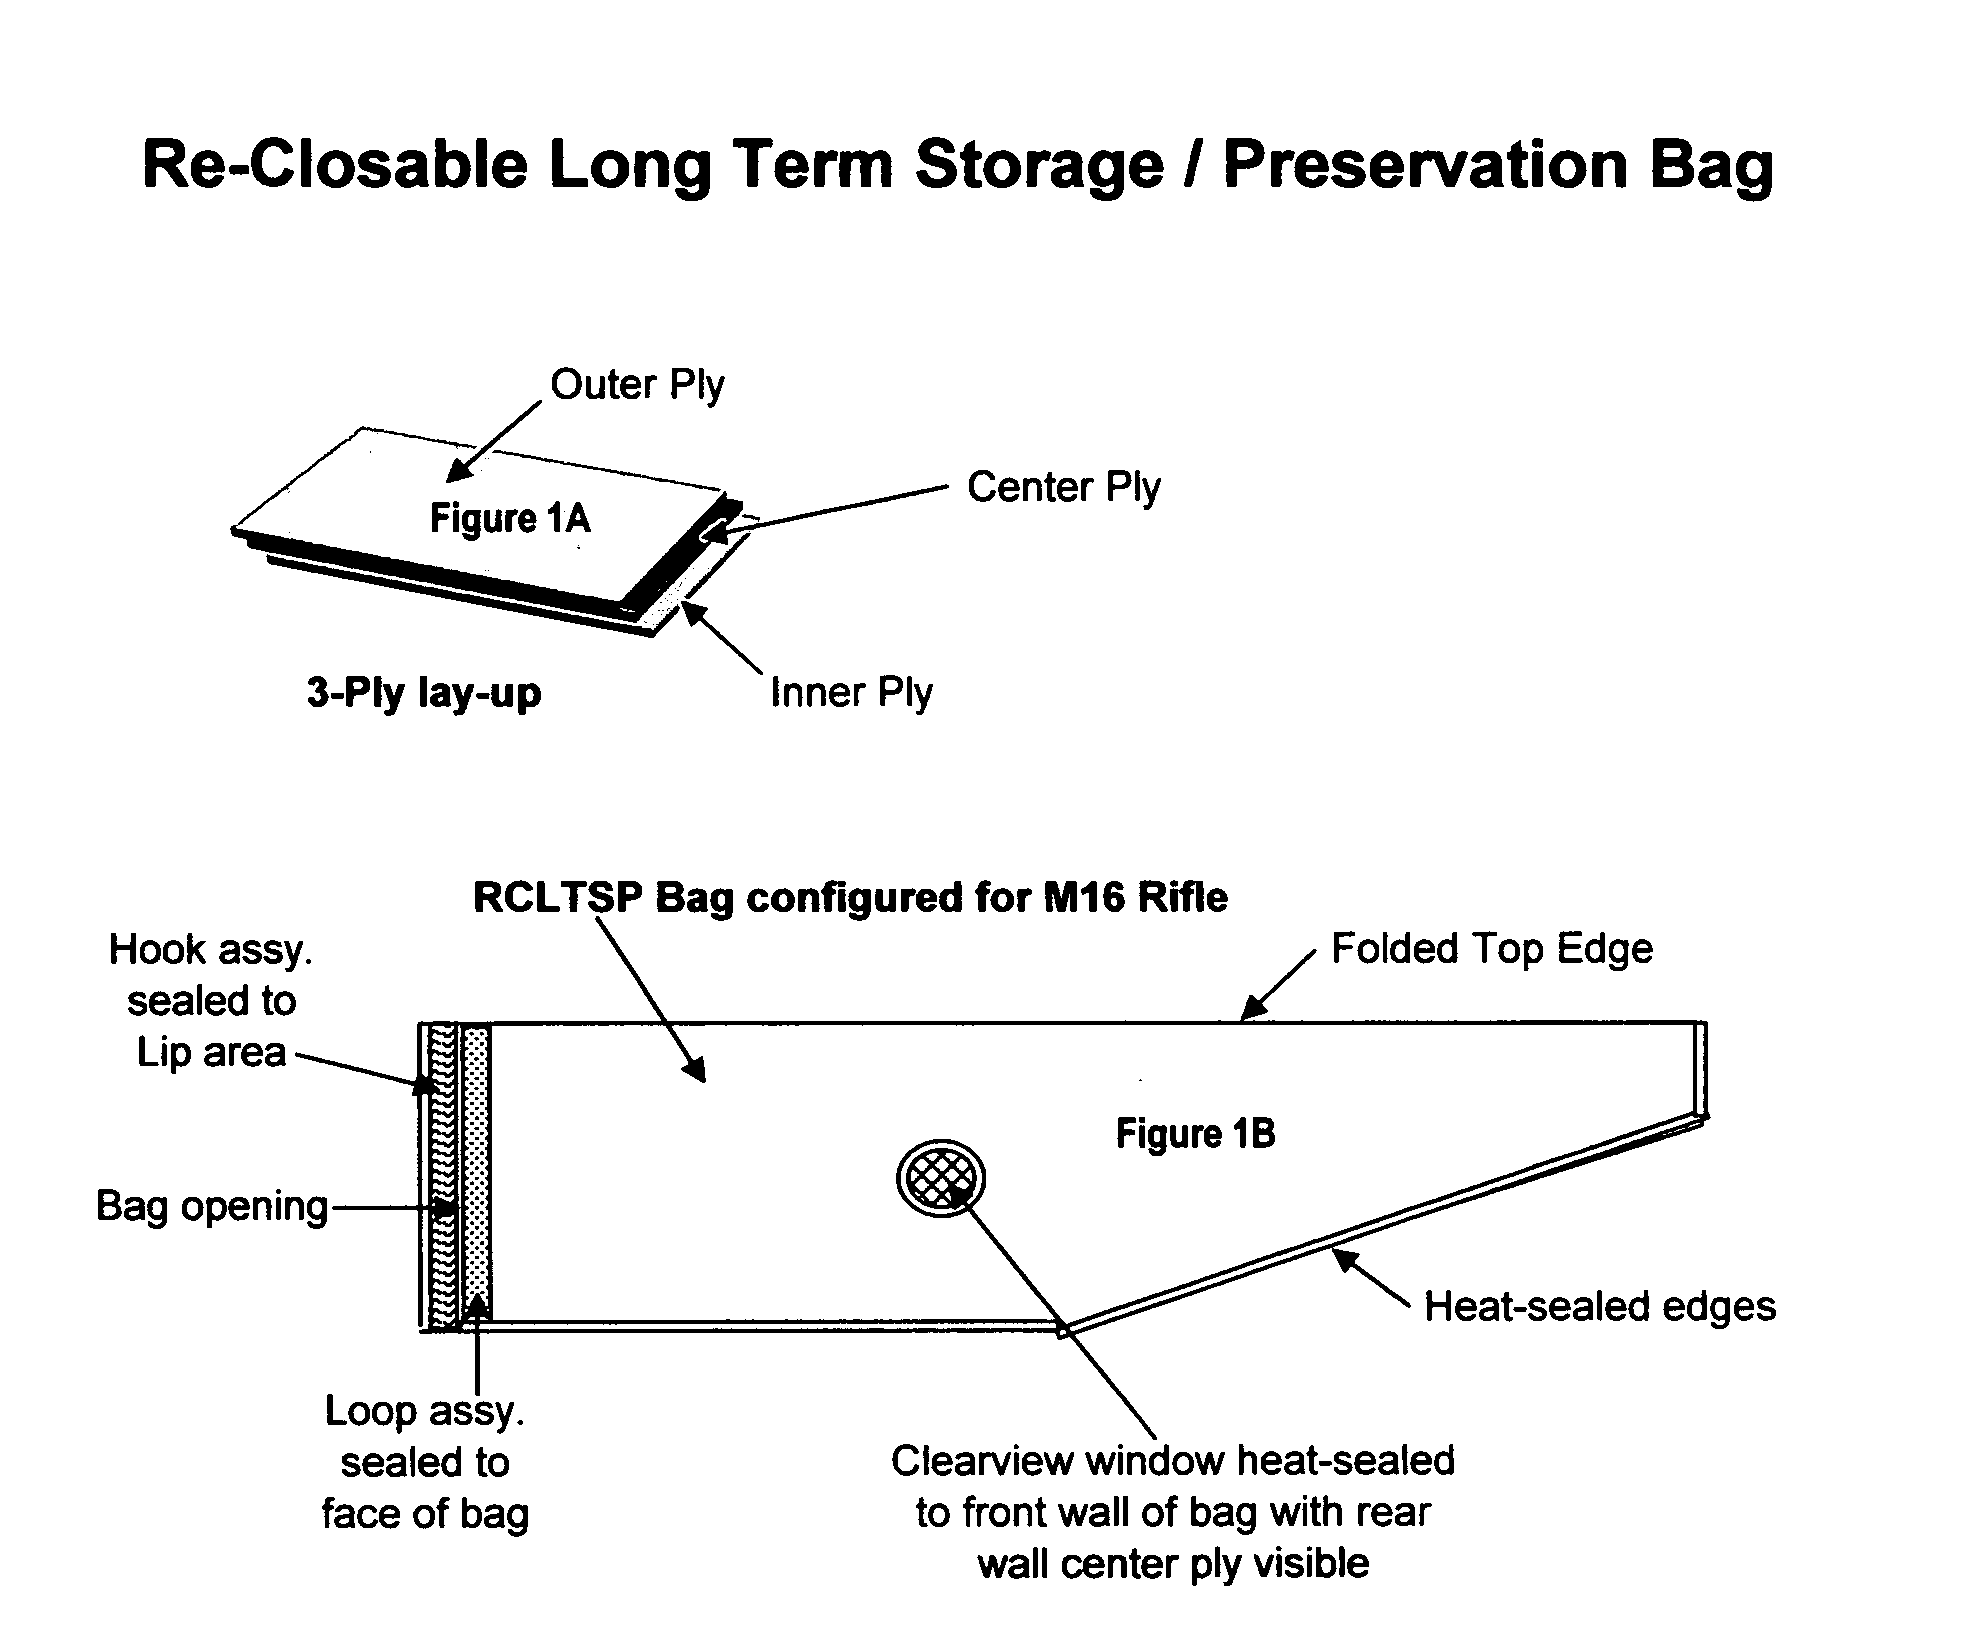 Re-closable Long Term Storage / Preservation Bag (RCLTSP bag); for the prevention of corrosion on military and / or commercial weaponry